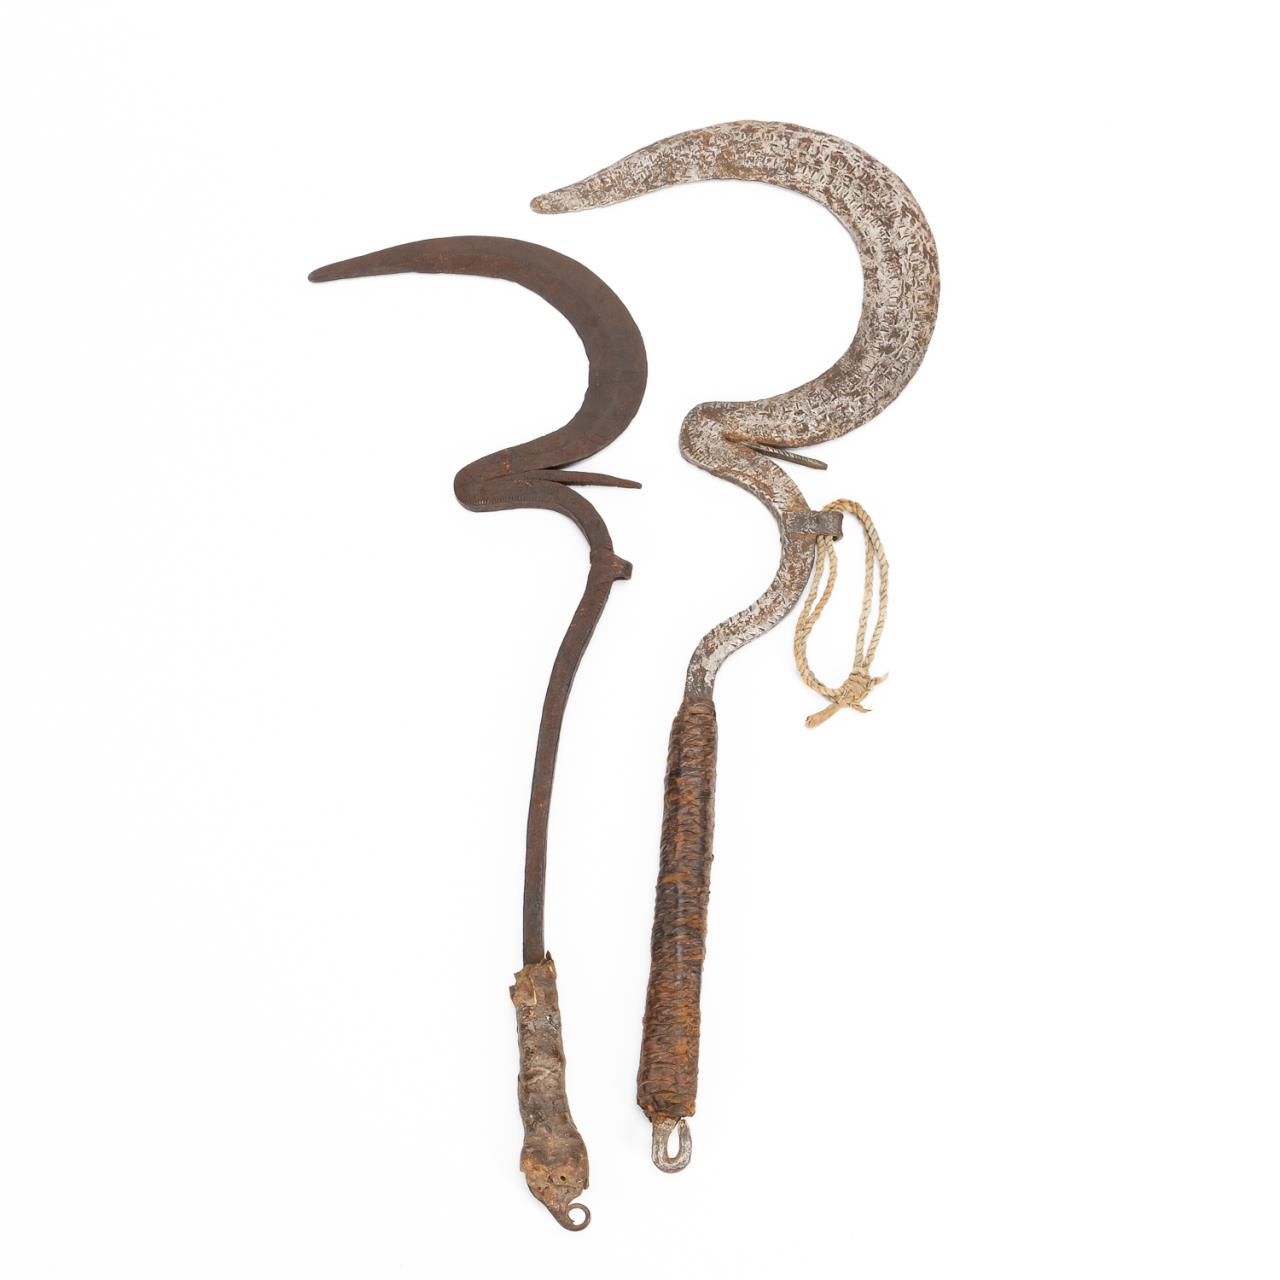 TWO AFRICAN SENGESE SICKLE THROWING 35a2c0